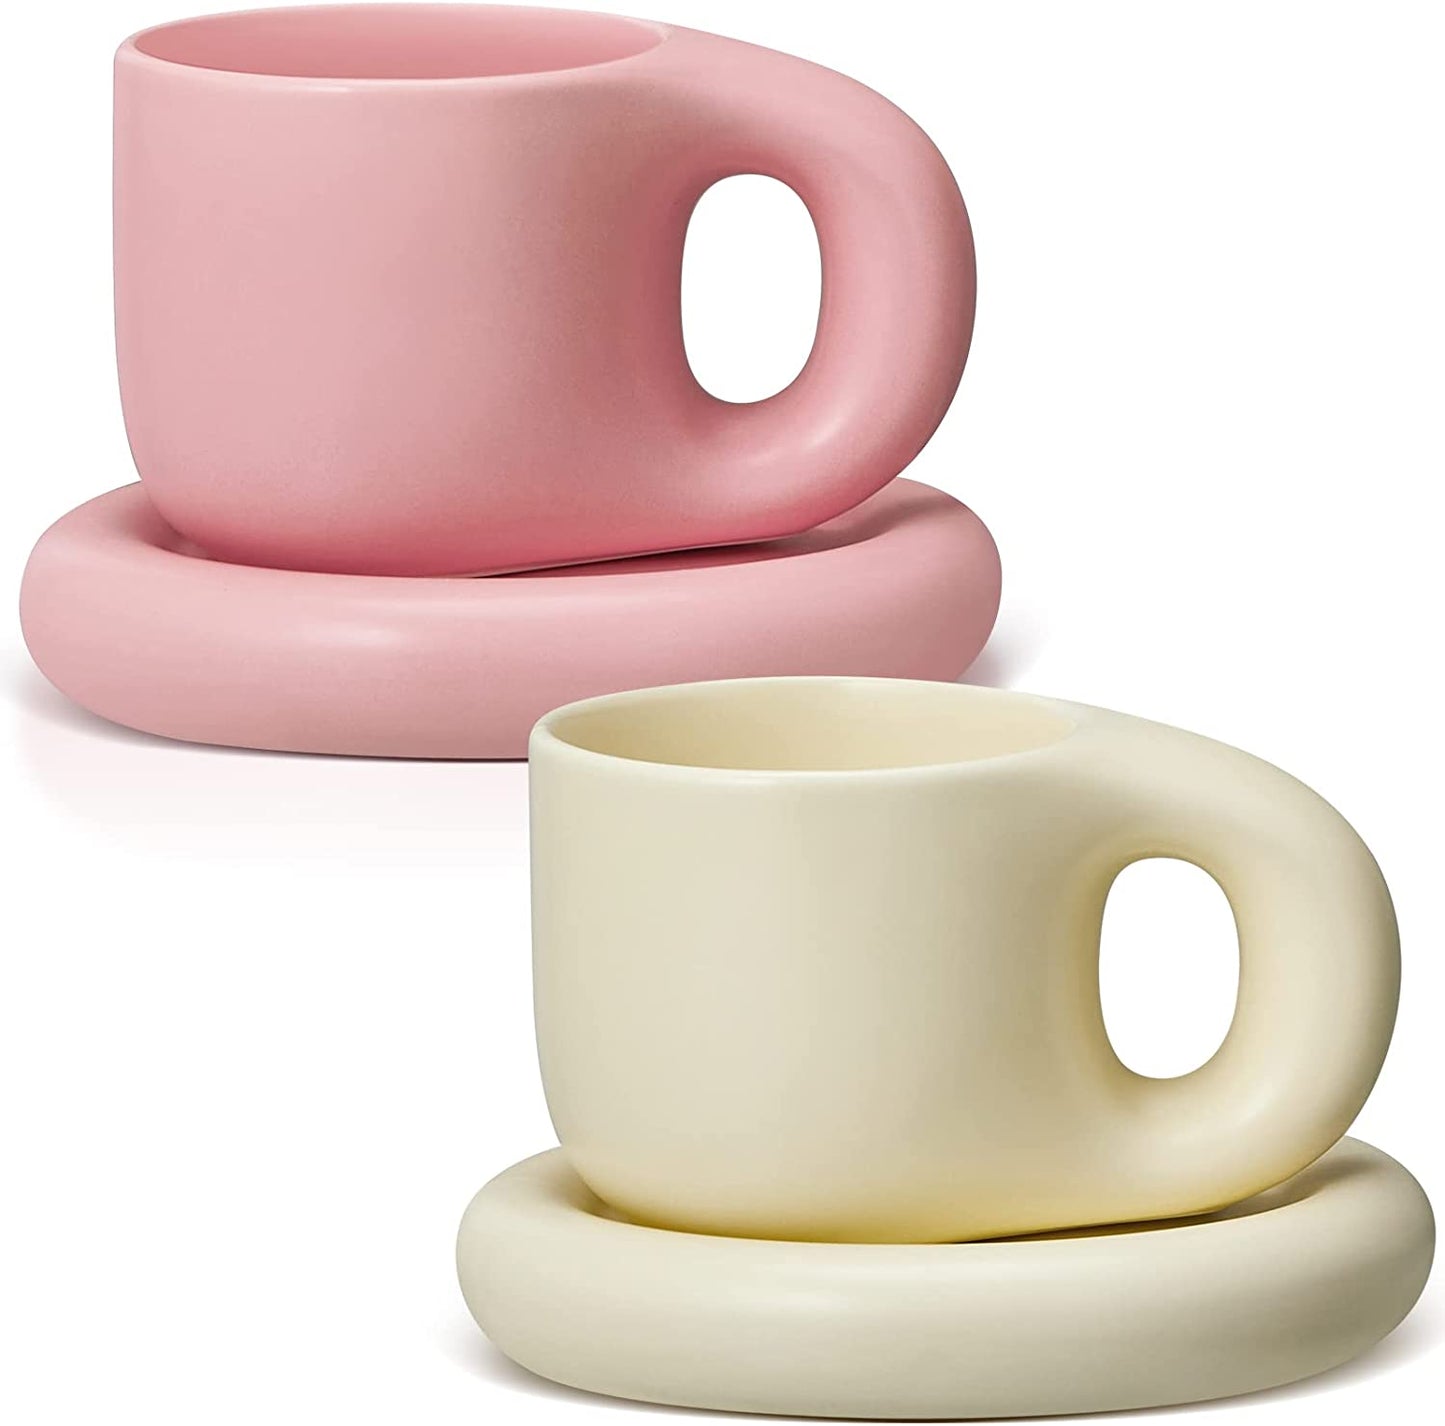 2 Pieces Ceramic Cloud Mug Cute Cup with Coaster 7oz Cute Ceramic Coffee Mug with Saucer Set for Office Home Coffee Tea Latte Milk, Pink and Pearl White (Chubby)